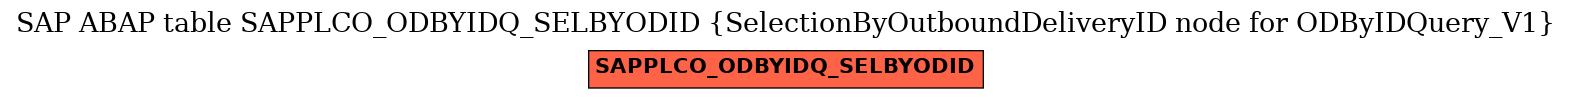 E-R Diagram for table SAPPLCO_ODBYIDQ_SELBYODID (SelectionByOutboundDeliveryID node for ODByIDQuery_V1)